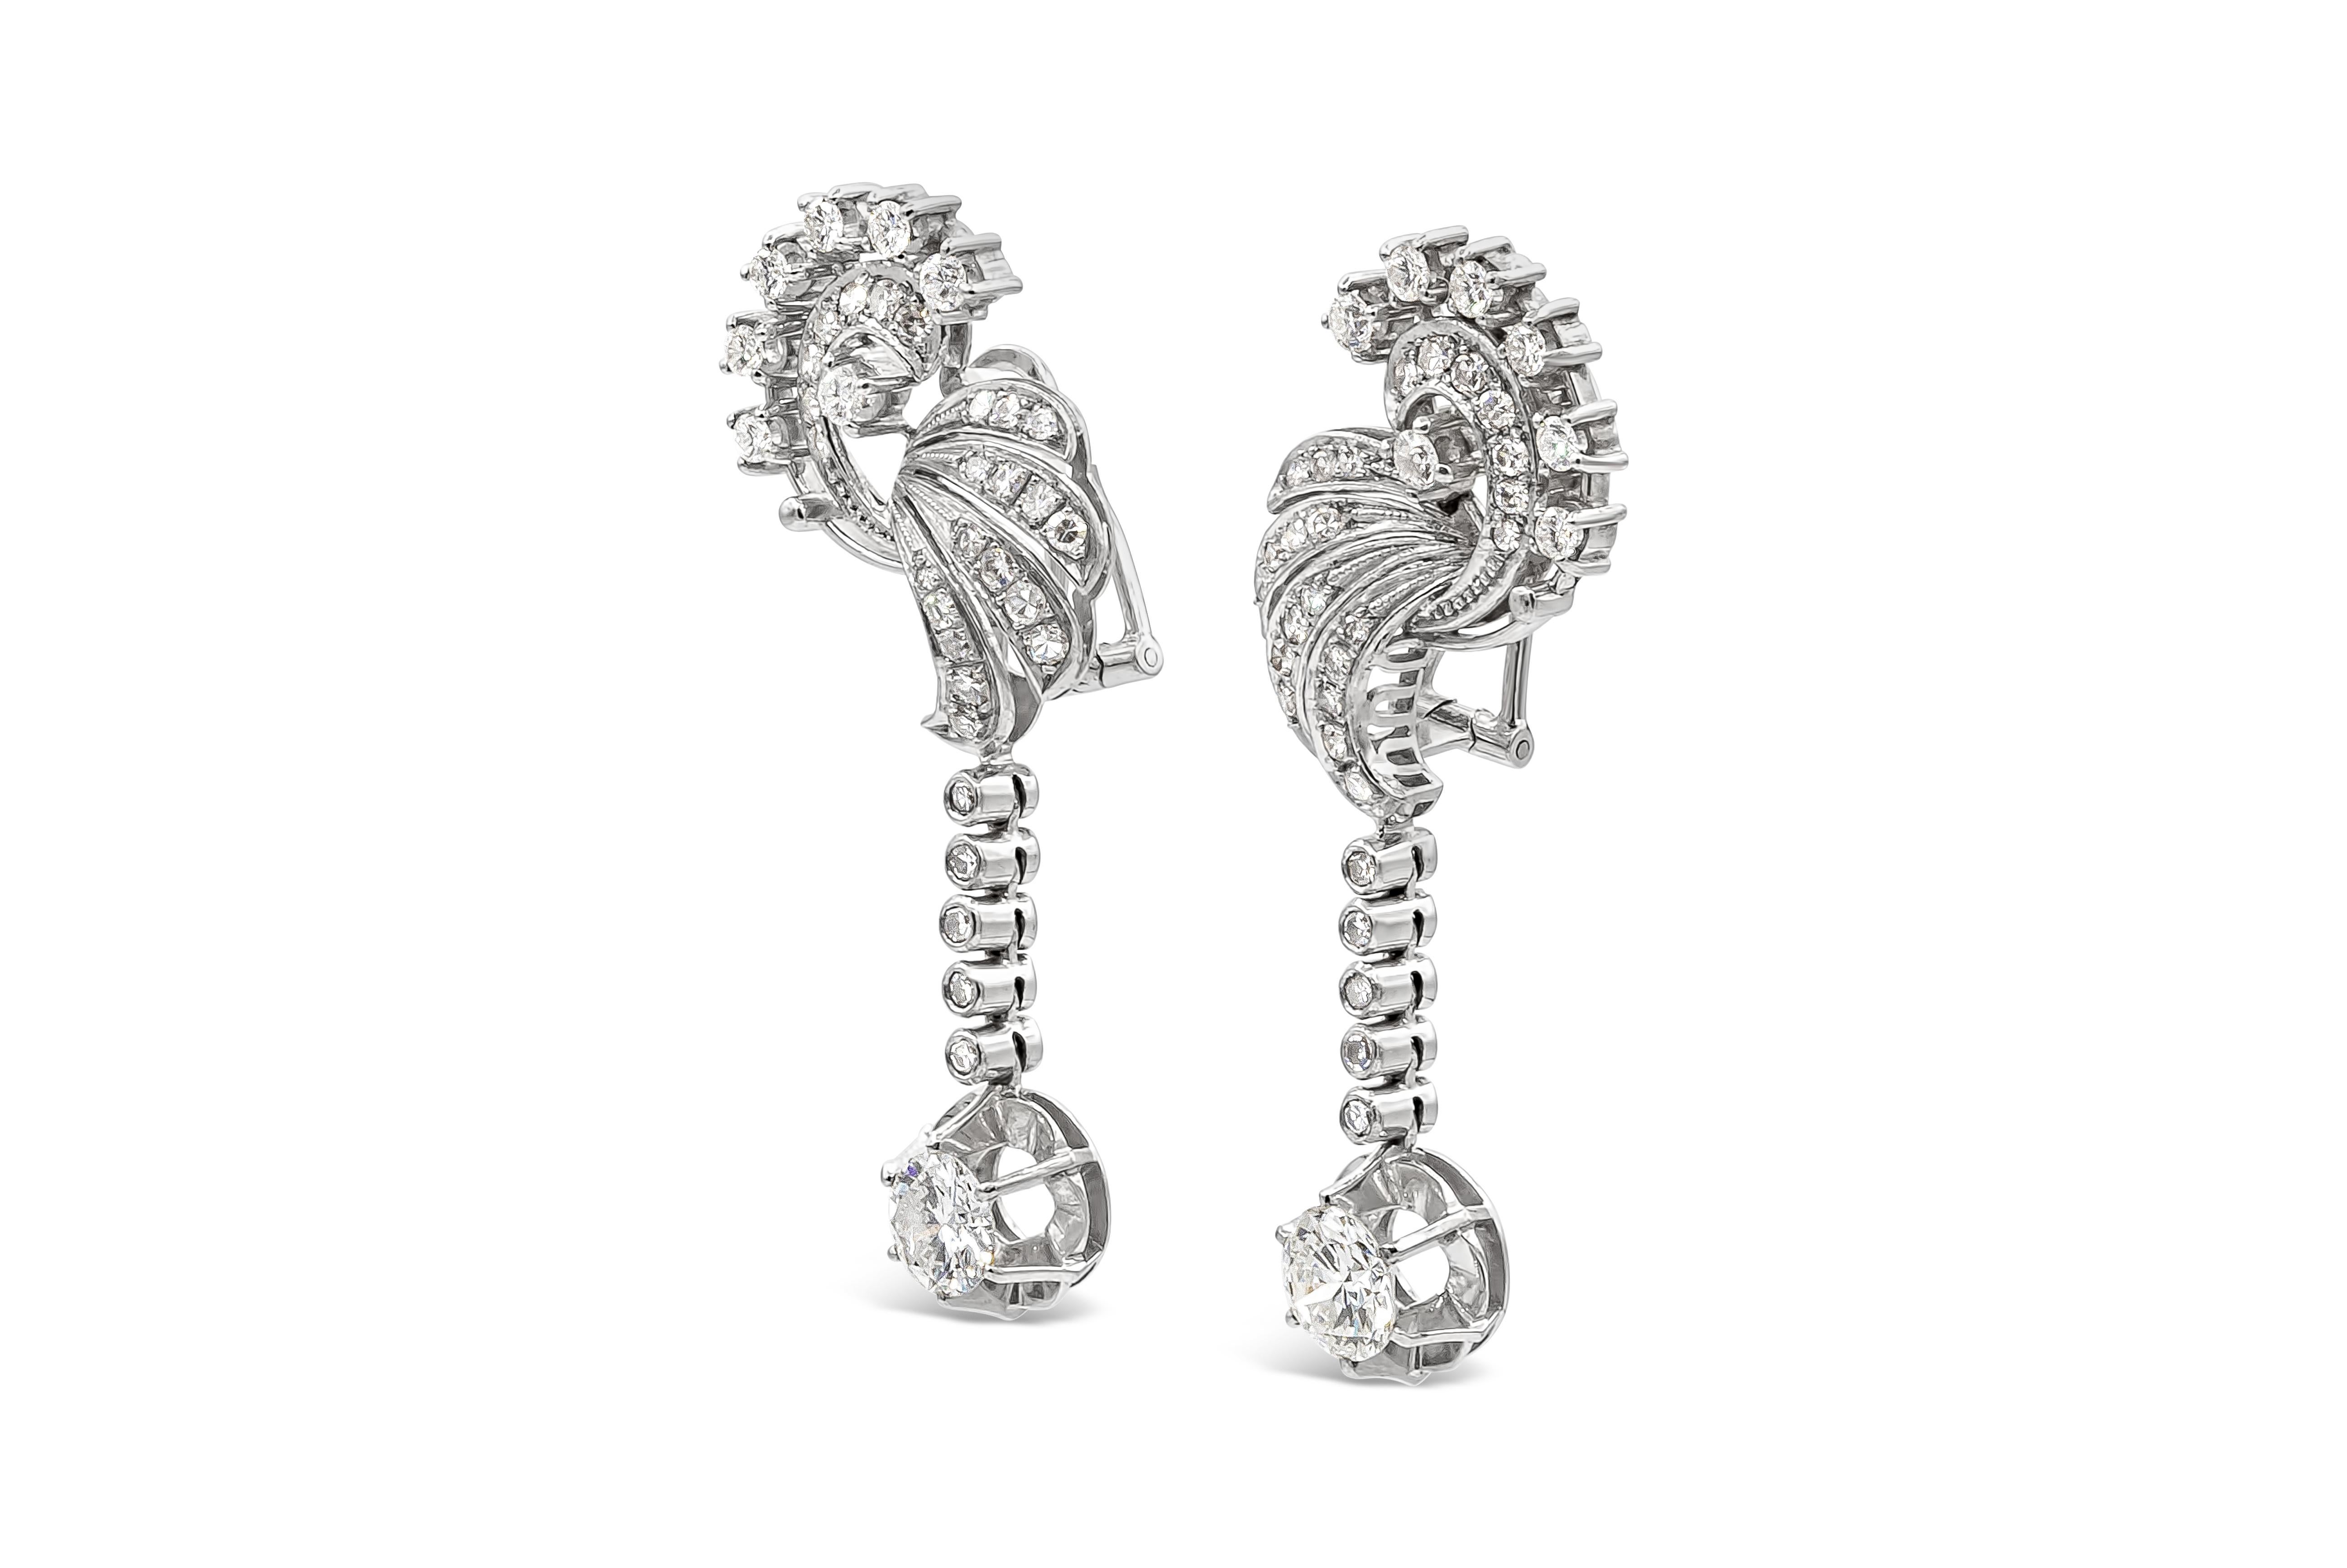 A vintage pair of dangling earrings showcasing two brilliant round diamond weighing 2.25 carats elegantly suspends in a line of bezel set round diamonds and hanging from a intricate filigree design work embellished with round melee diamonds.